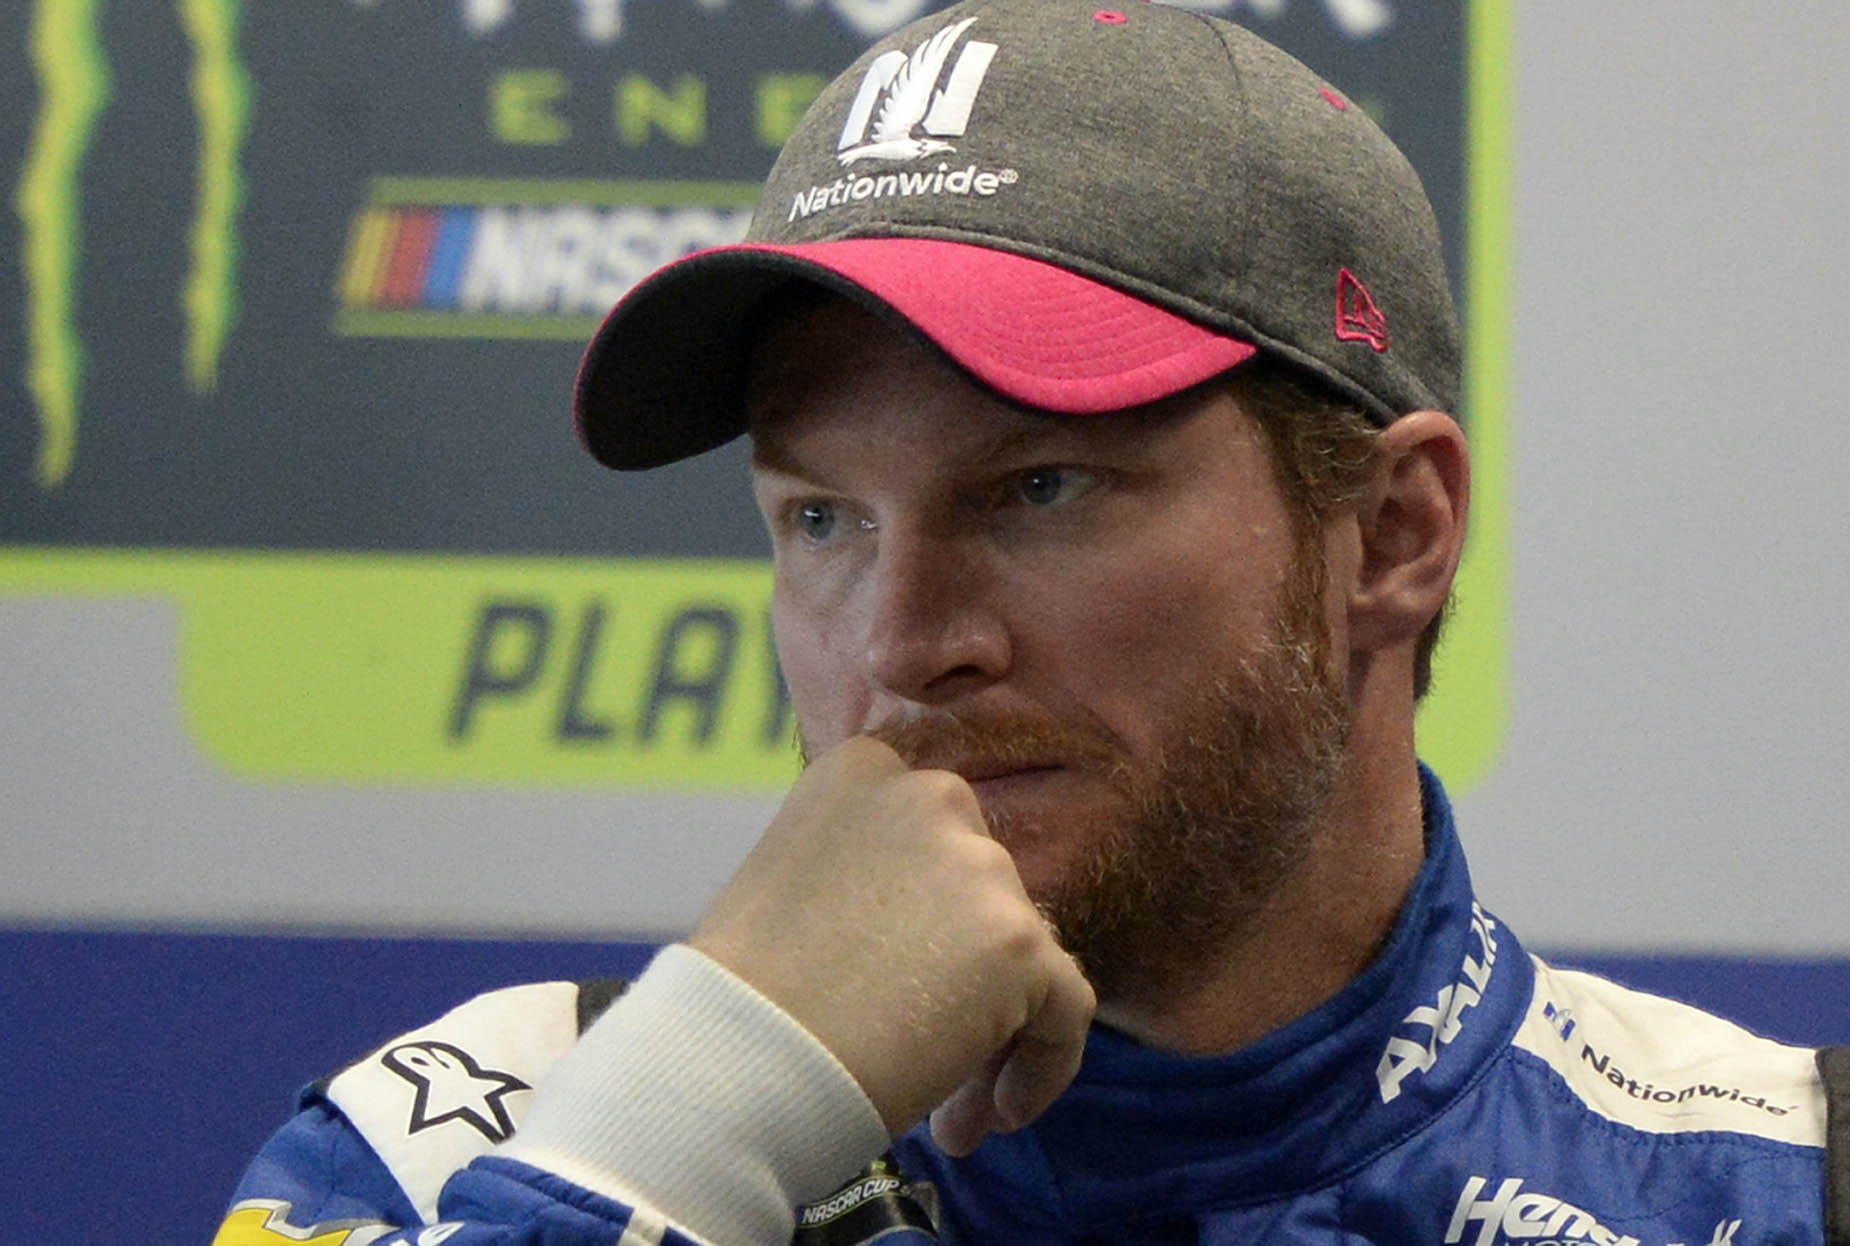 Dale Earnhardt Jr. during his media availability in 2017.